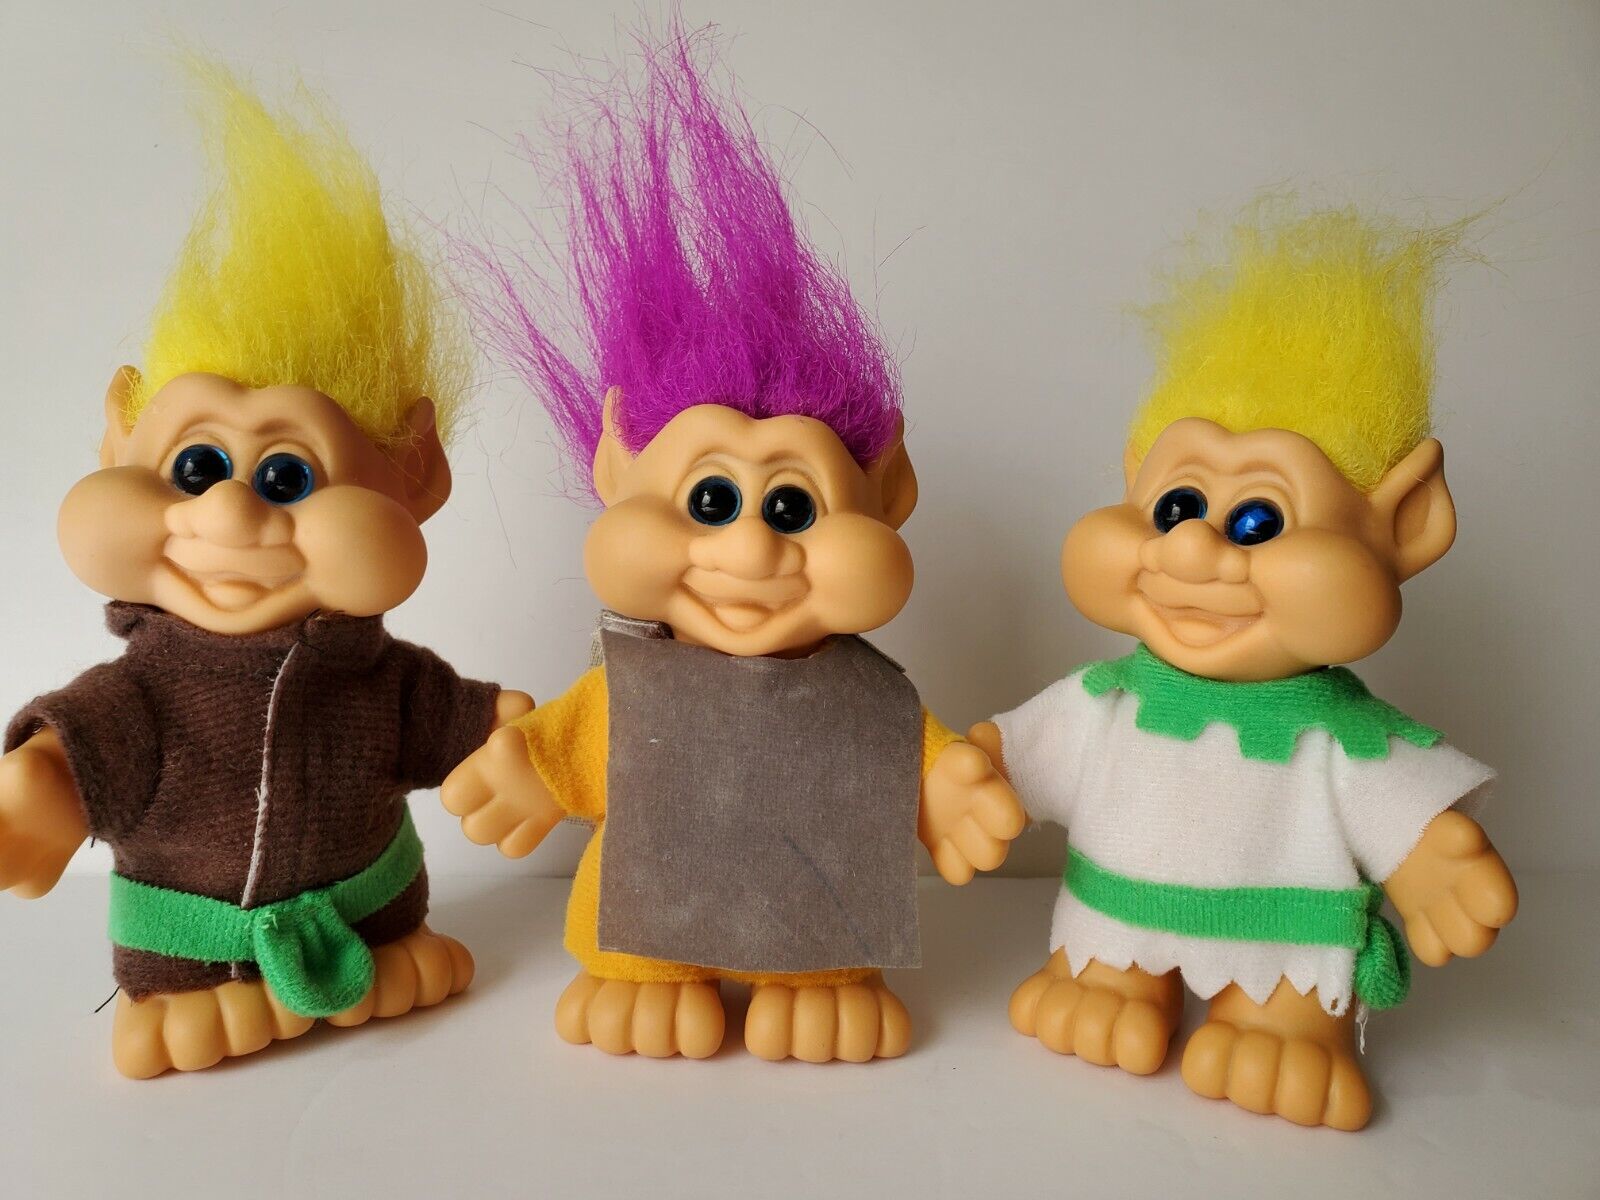 Vintage ITB Troll Dolls Lot of 3  Knight Monk & Squire Outfits 5 Inches 1991 ITB